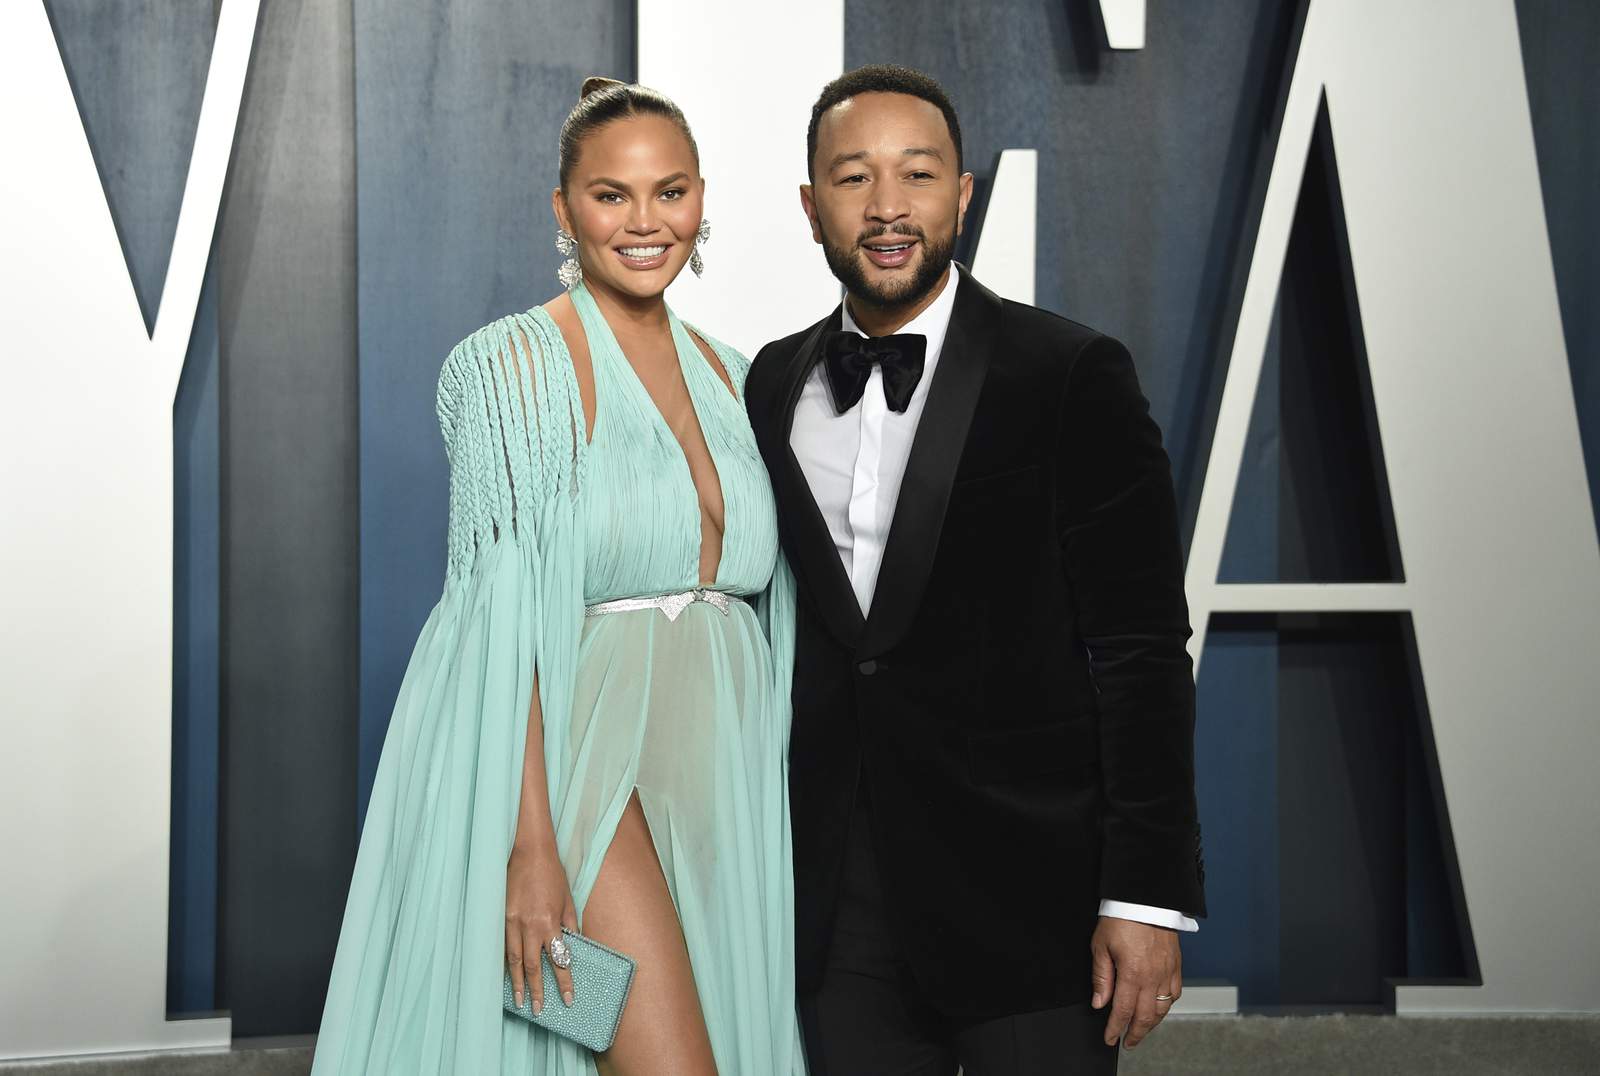 'This is unreal’: Chrissy Teigen and John Legend grieve their miscarriage